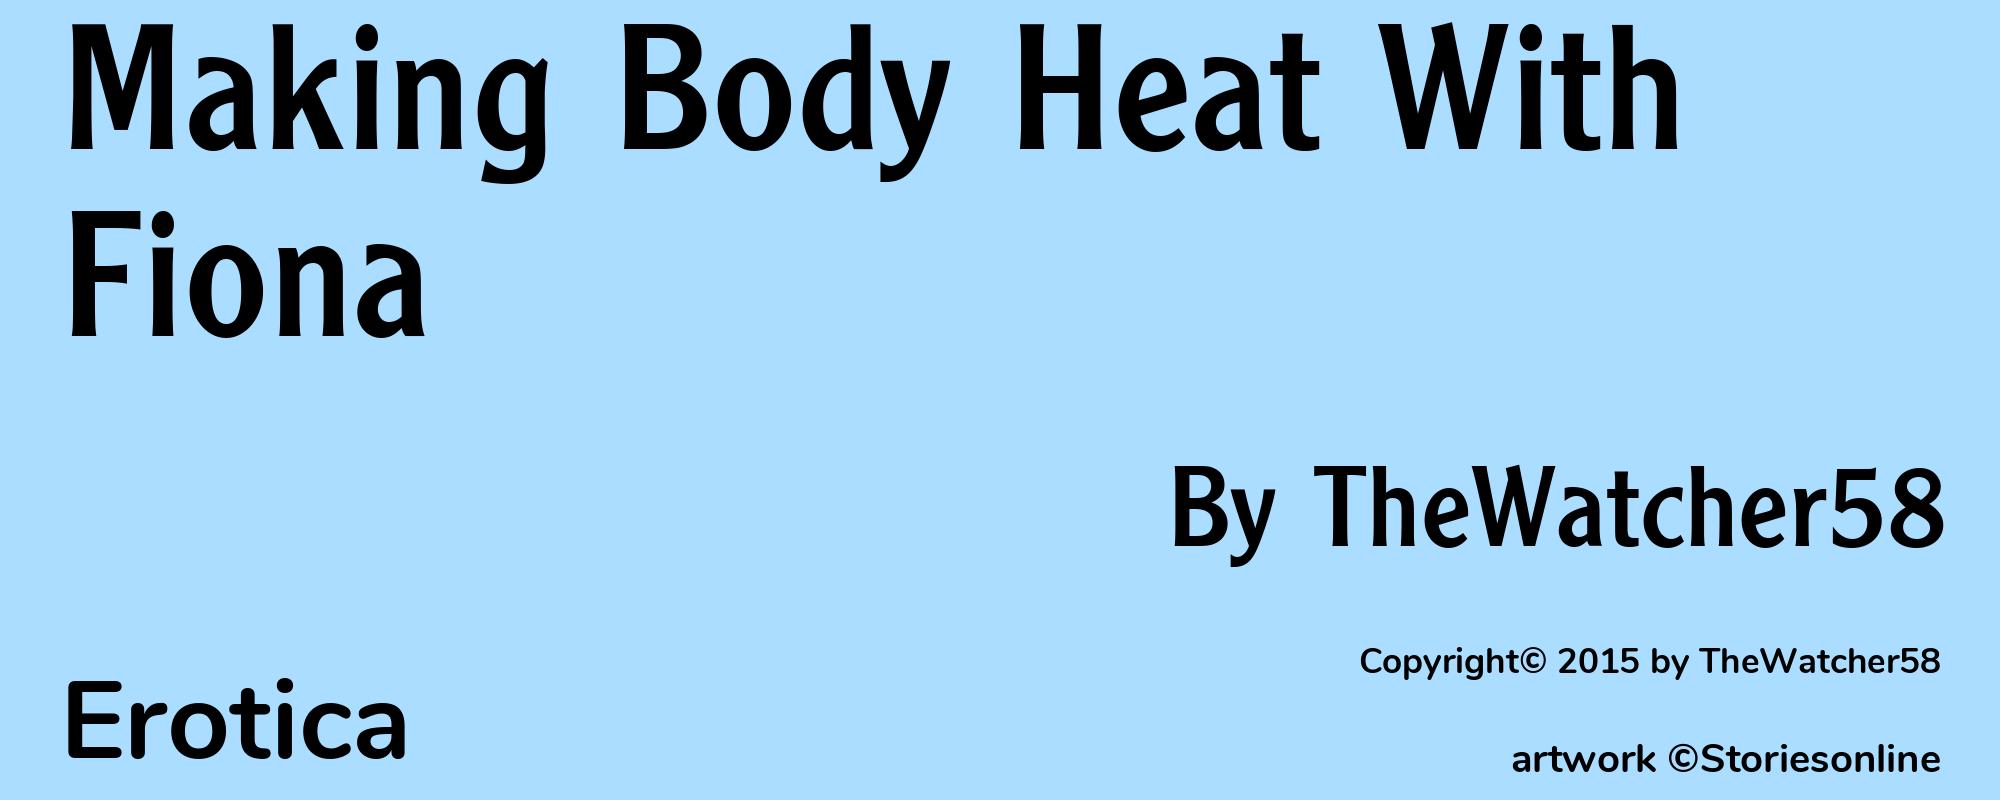 Making Body Heat With Fiona - Cover